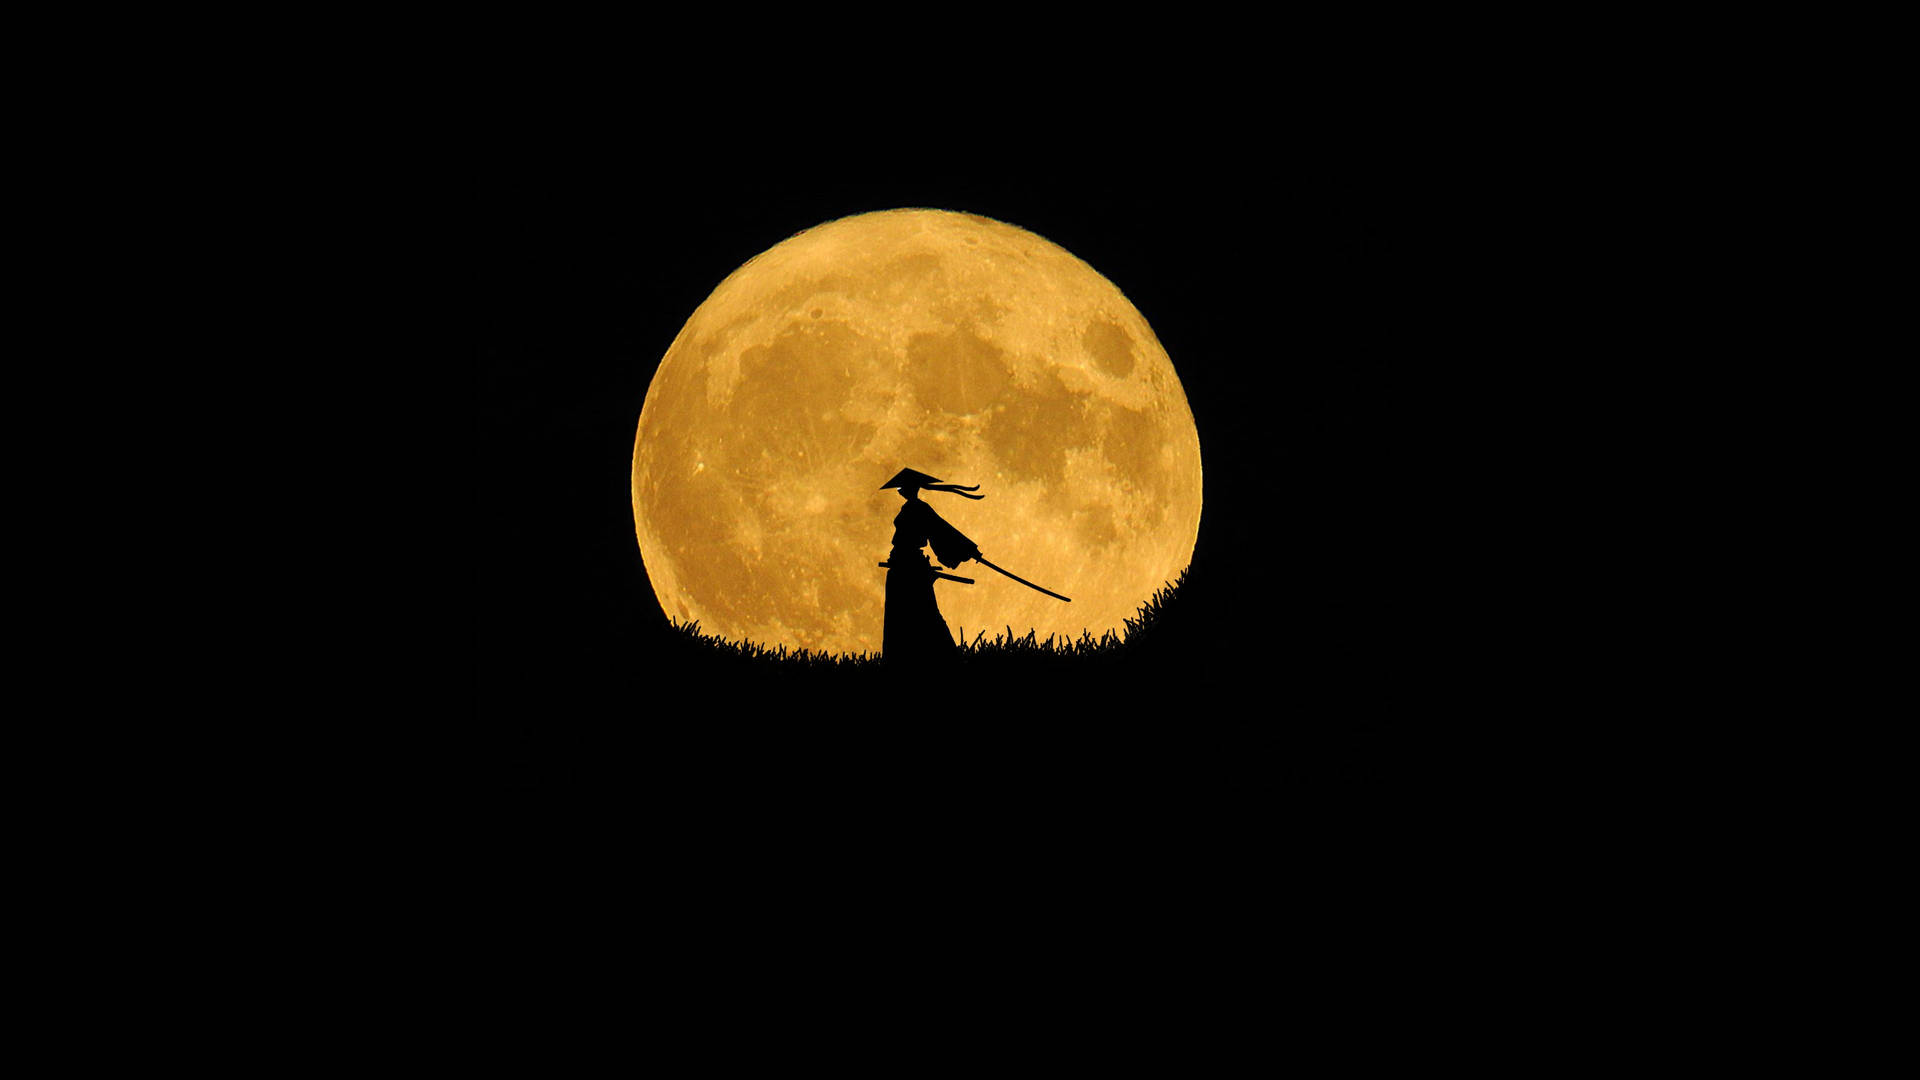 Cool Japanese Samurai And Full Moon Background